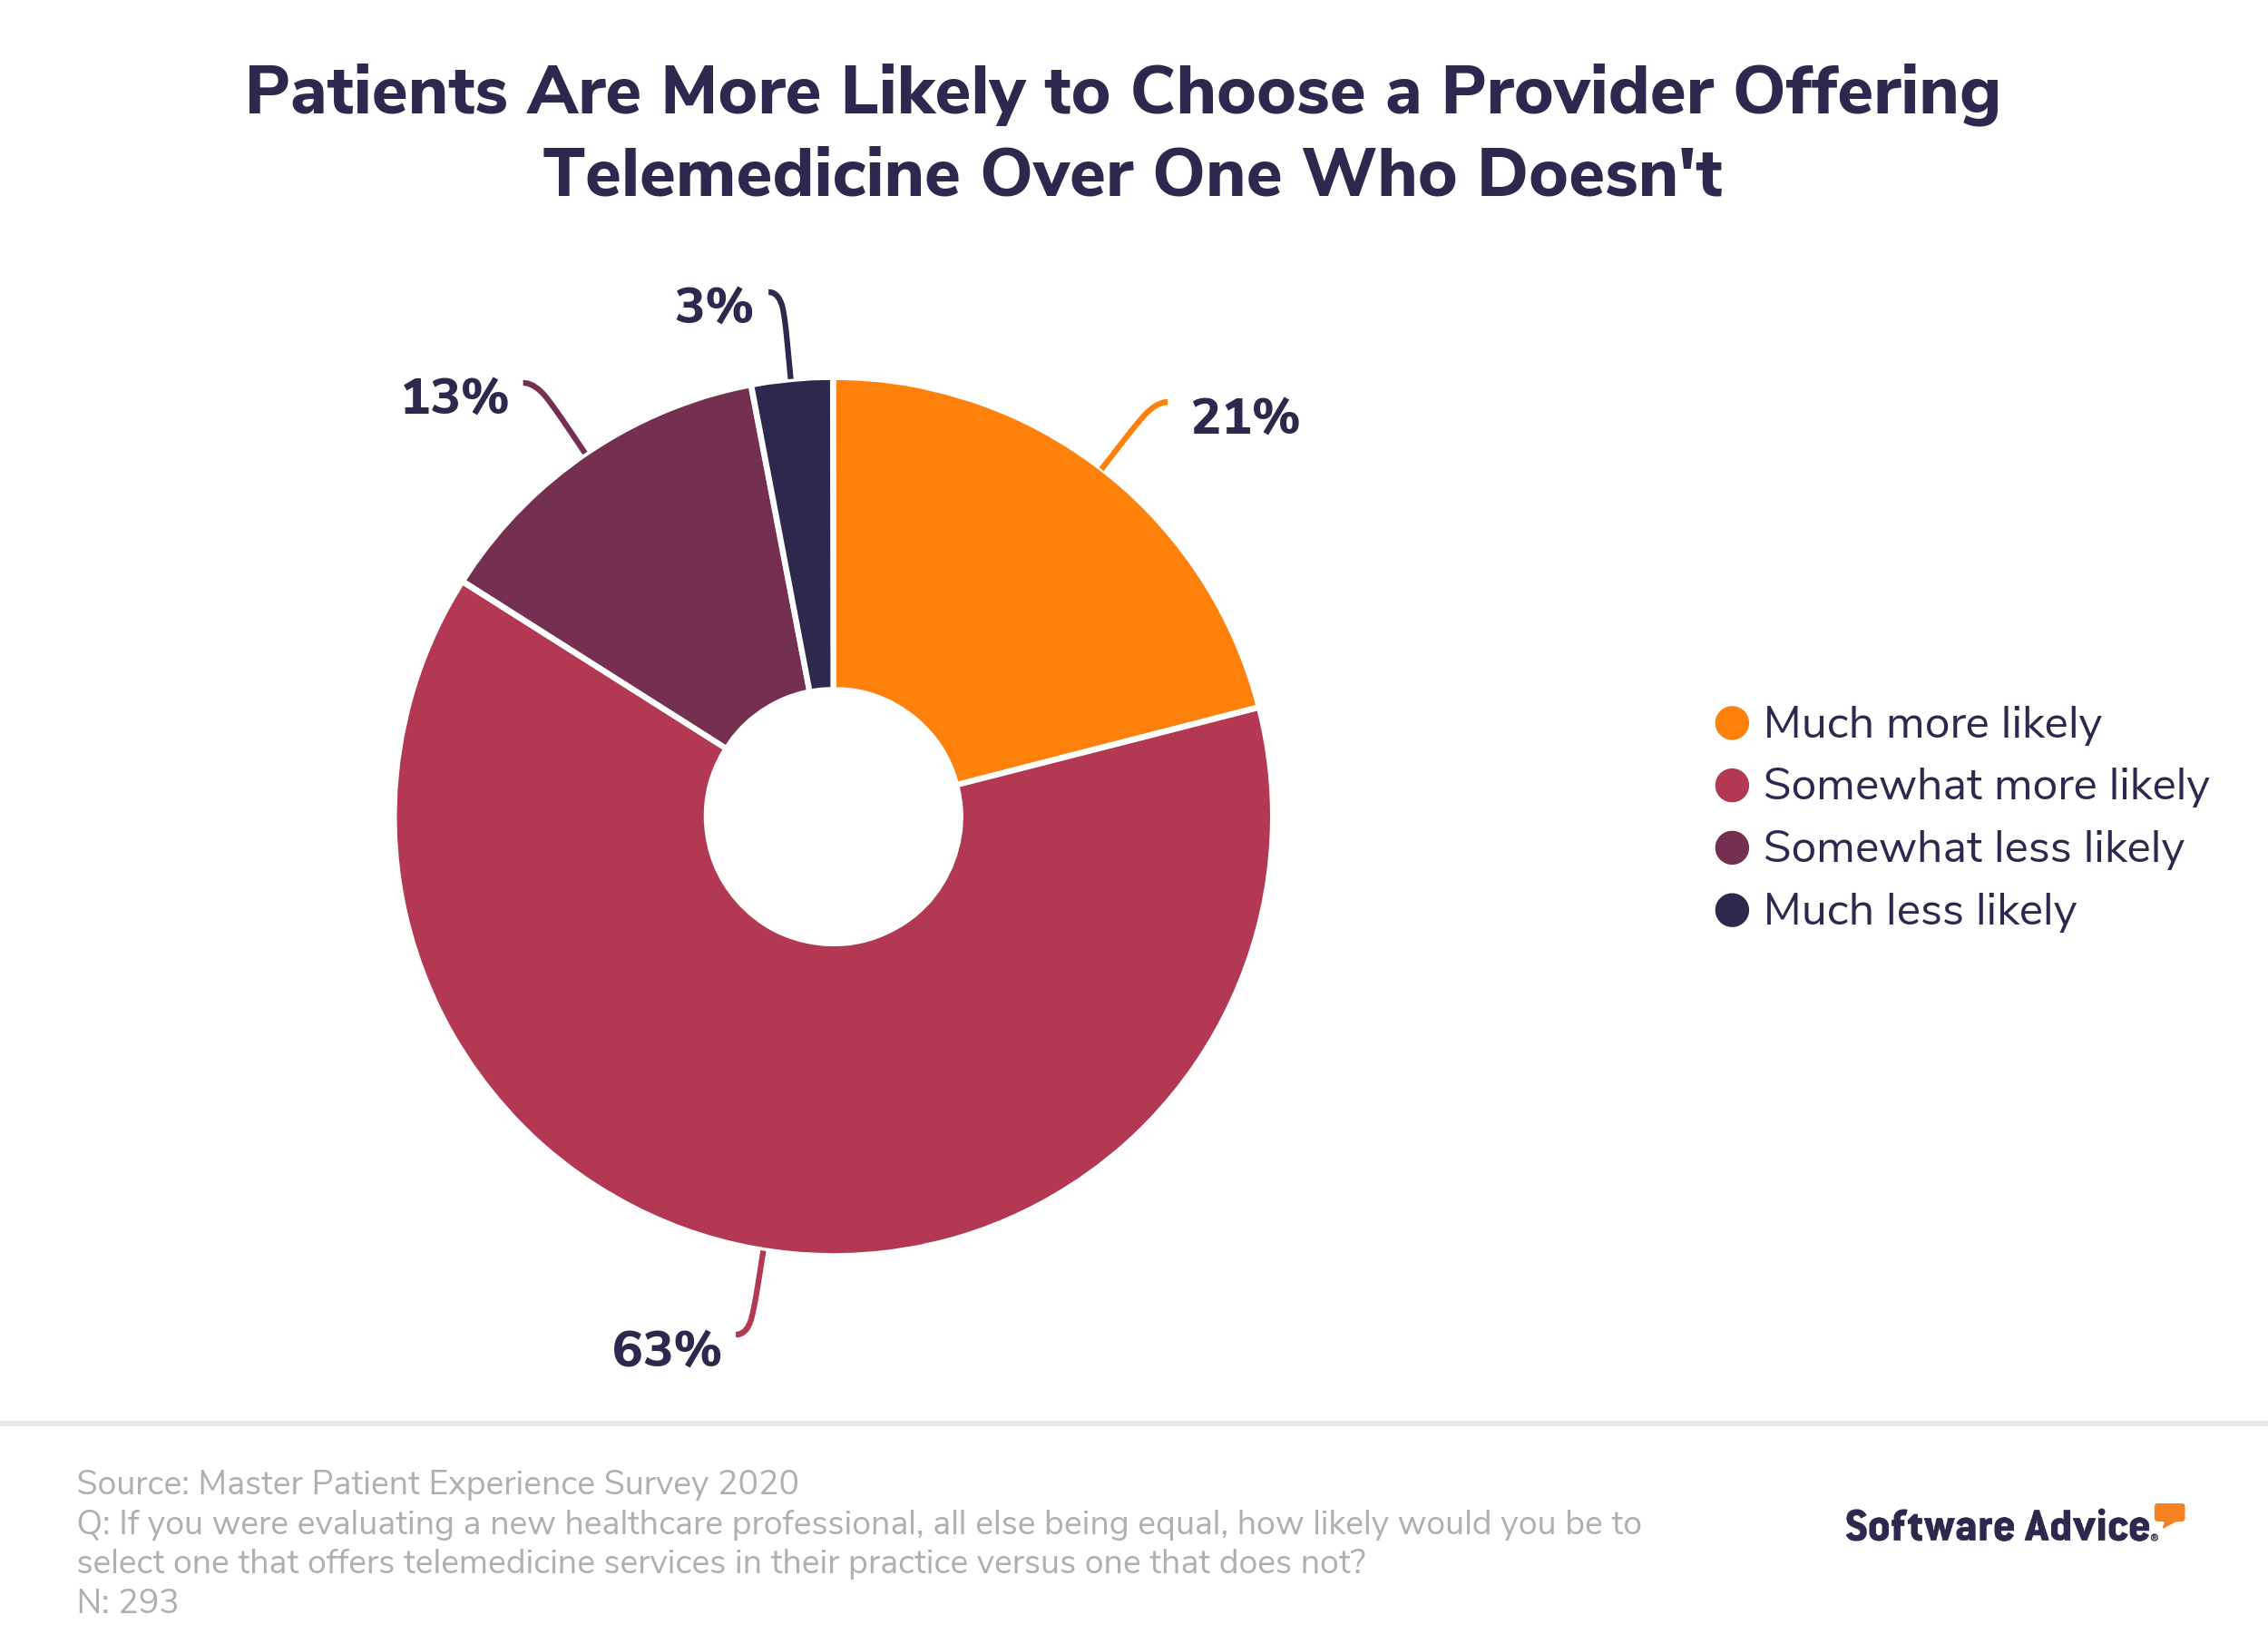 More patients are expecting telehealth services from their healthcare providers.